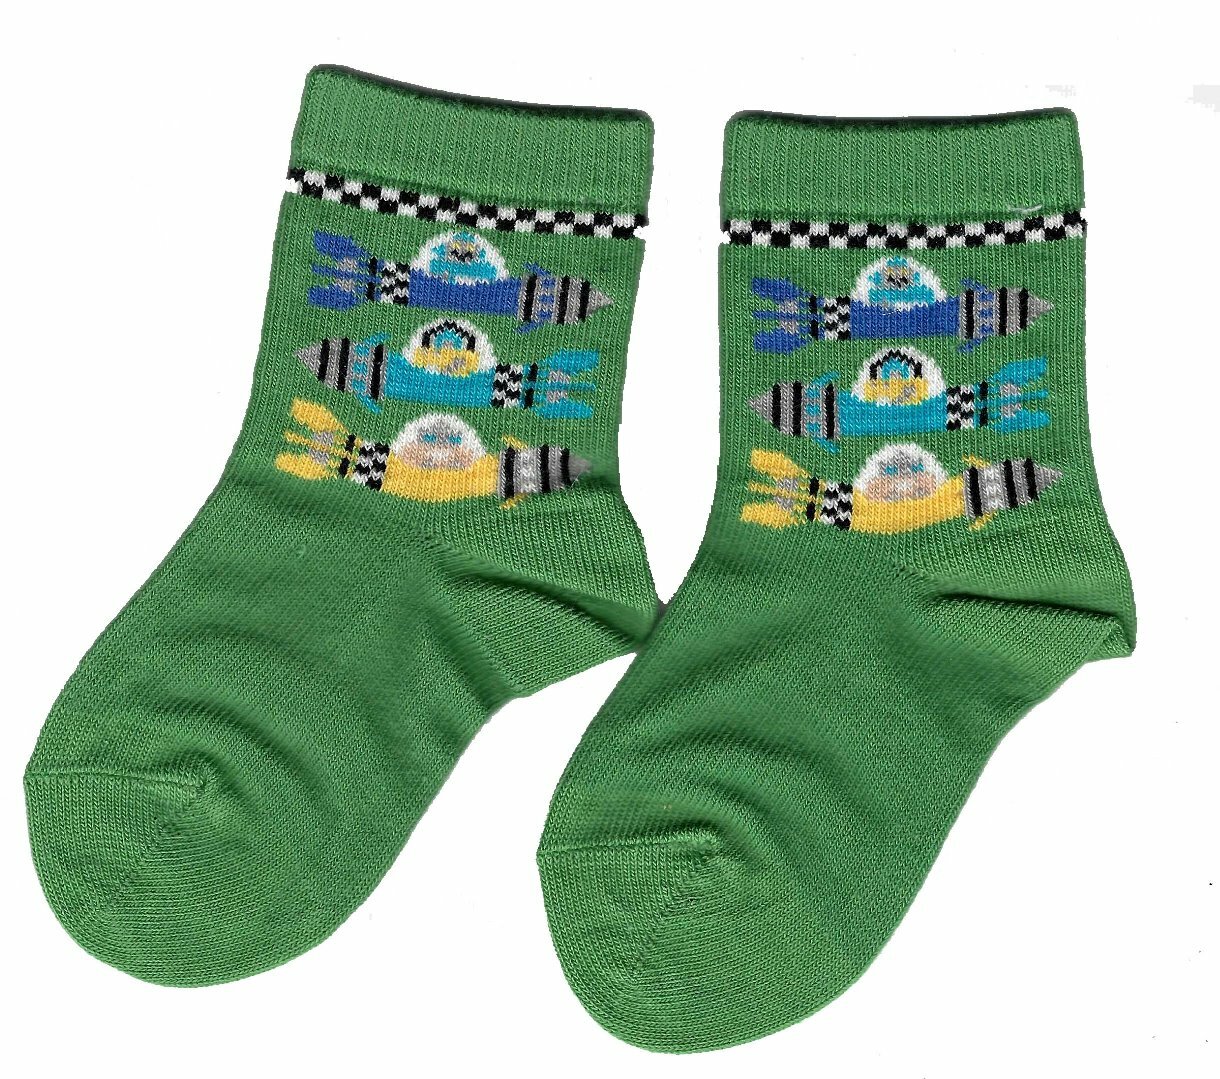 Boys' Alien Spaceship Socks by MP (Color: Lime, Sock Size: 0 (Shoe Size 4-6))